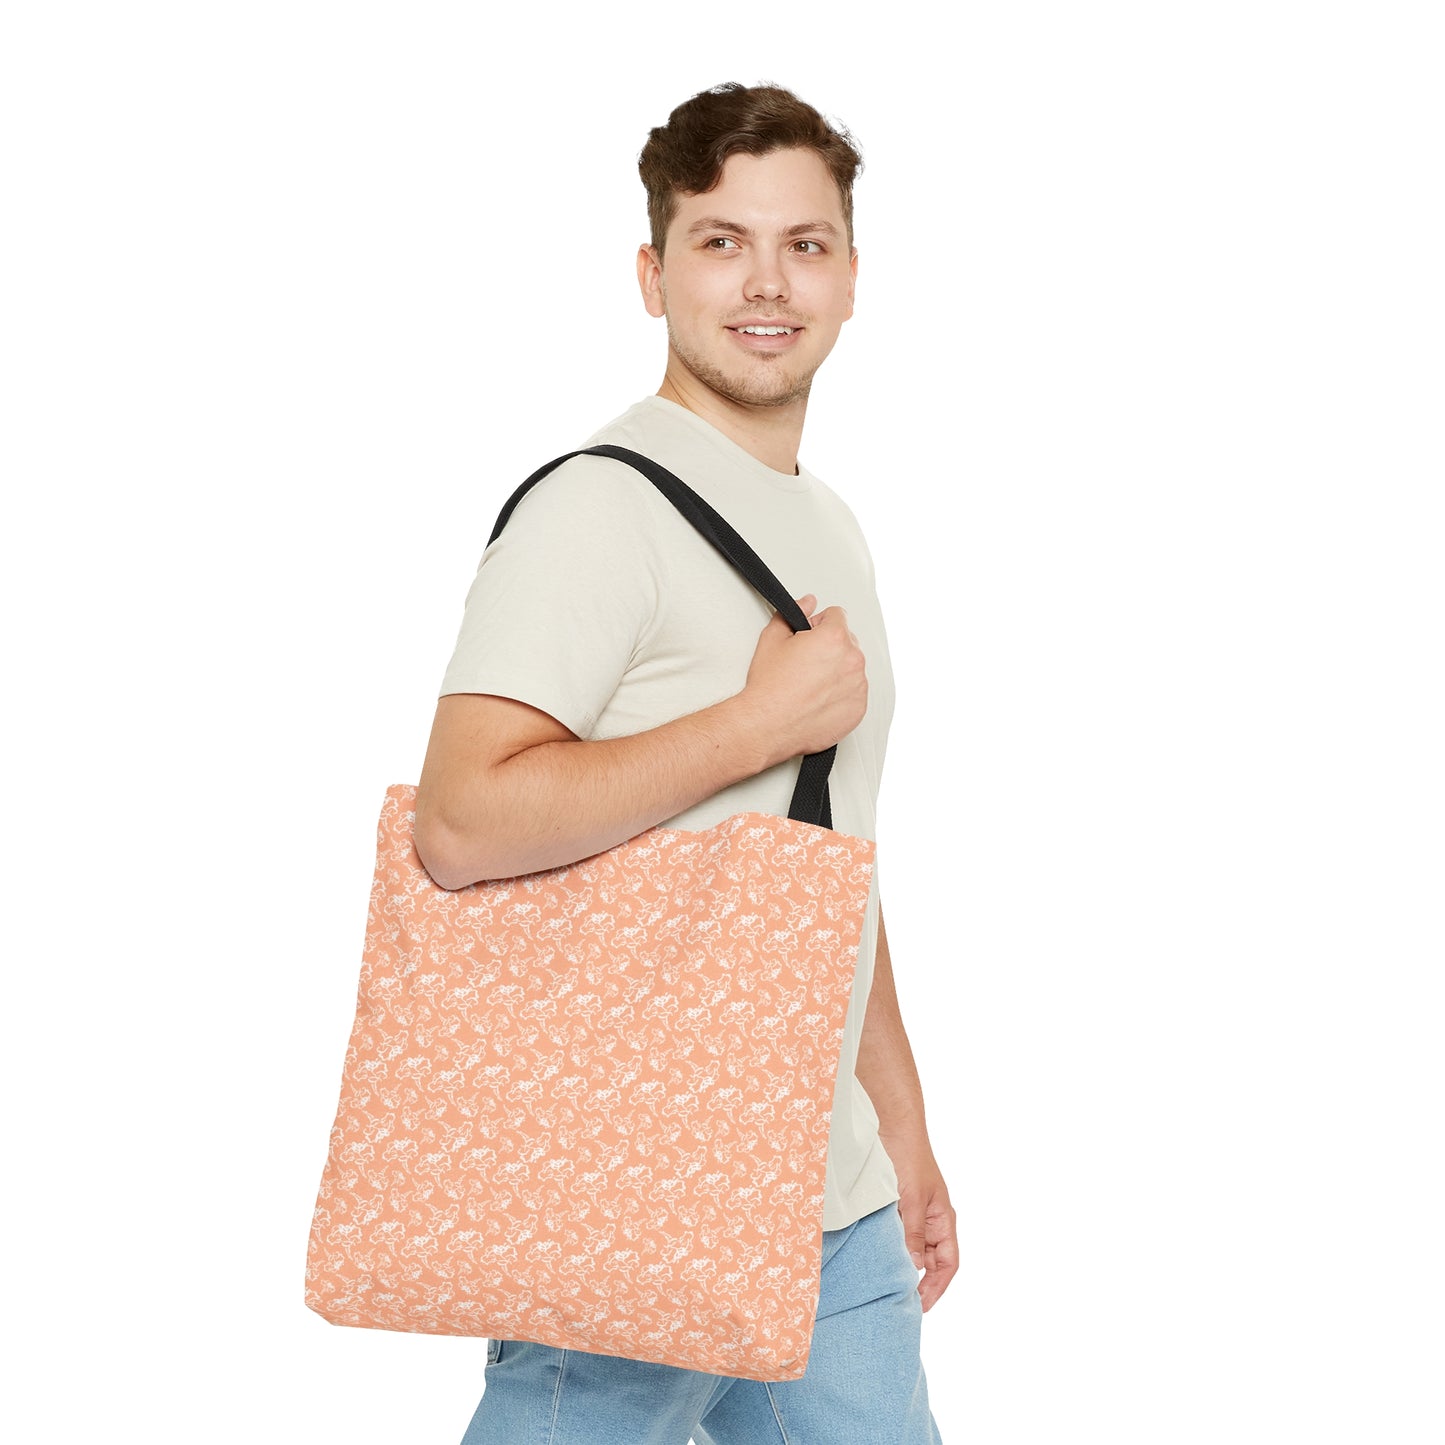 Light Peach with White Flowers Tote Bag